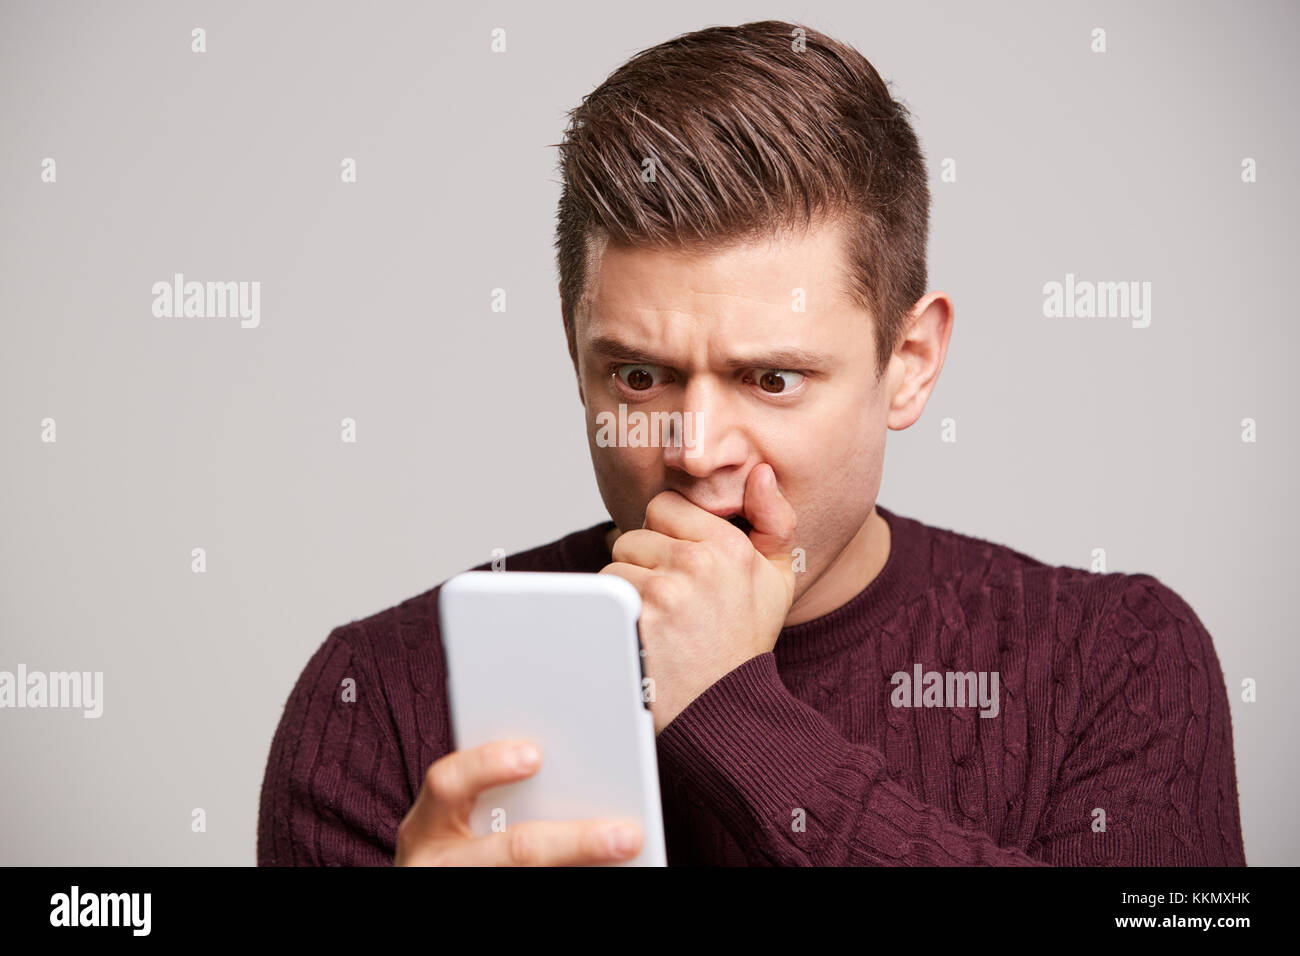 Portrait of a shocked young white man using a smartphone Stock Photo